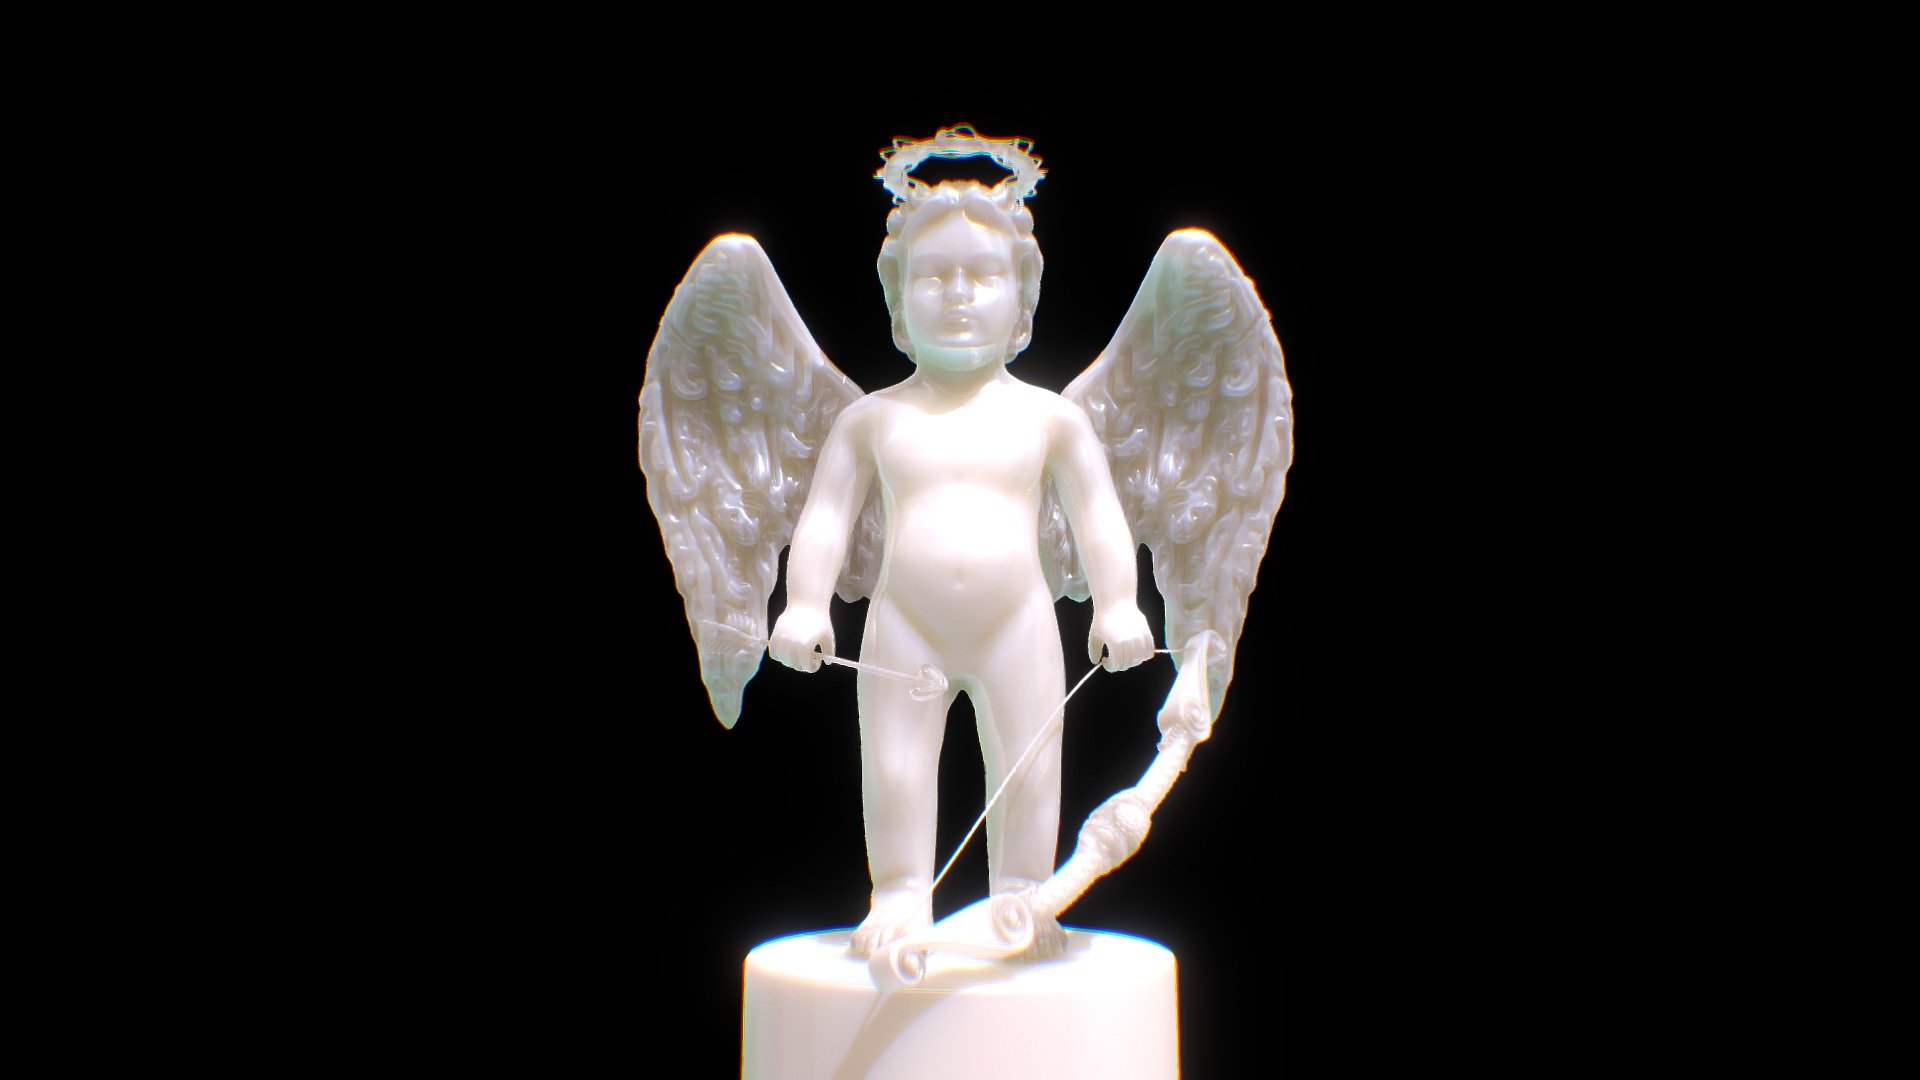 Greek &amp; Roman God of Love Cupid holding Bow and Arrow while
sleeping standing up - Cupid Eros - 3D model by Invictus fulgur (@Invictus_fulgur) 3d model